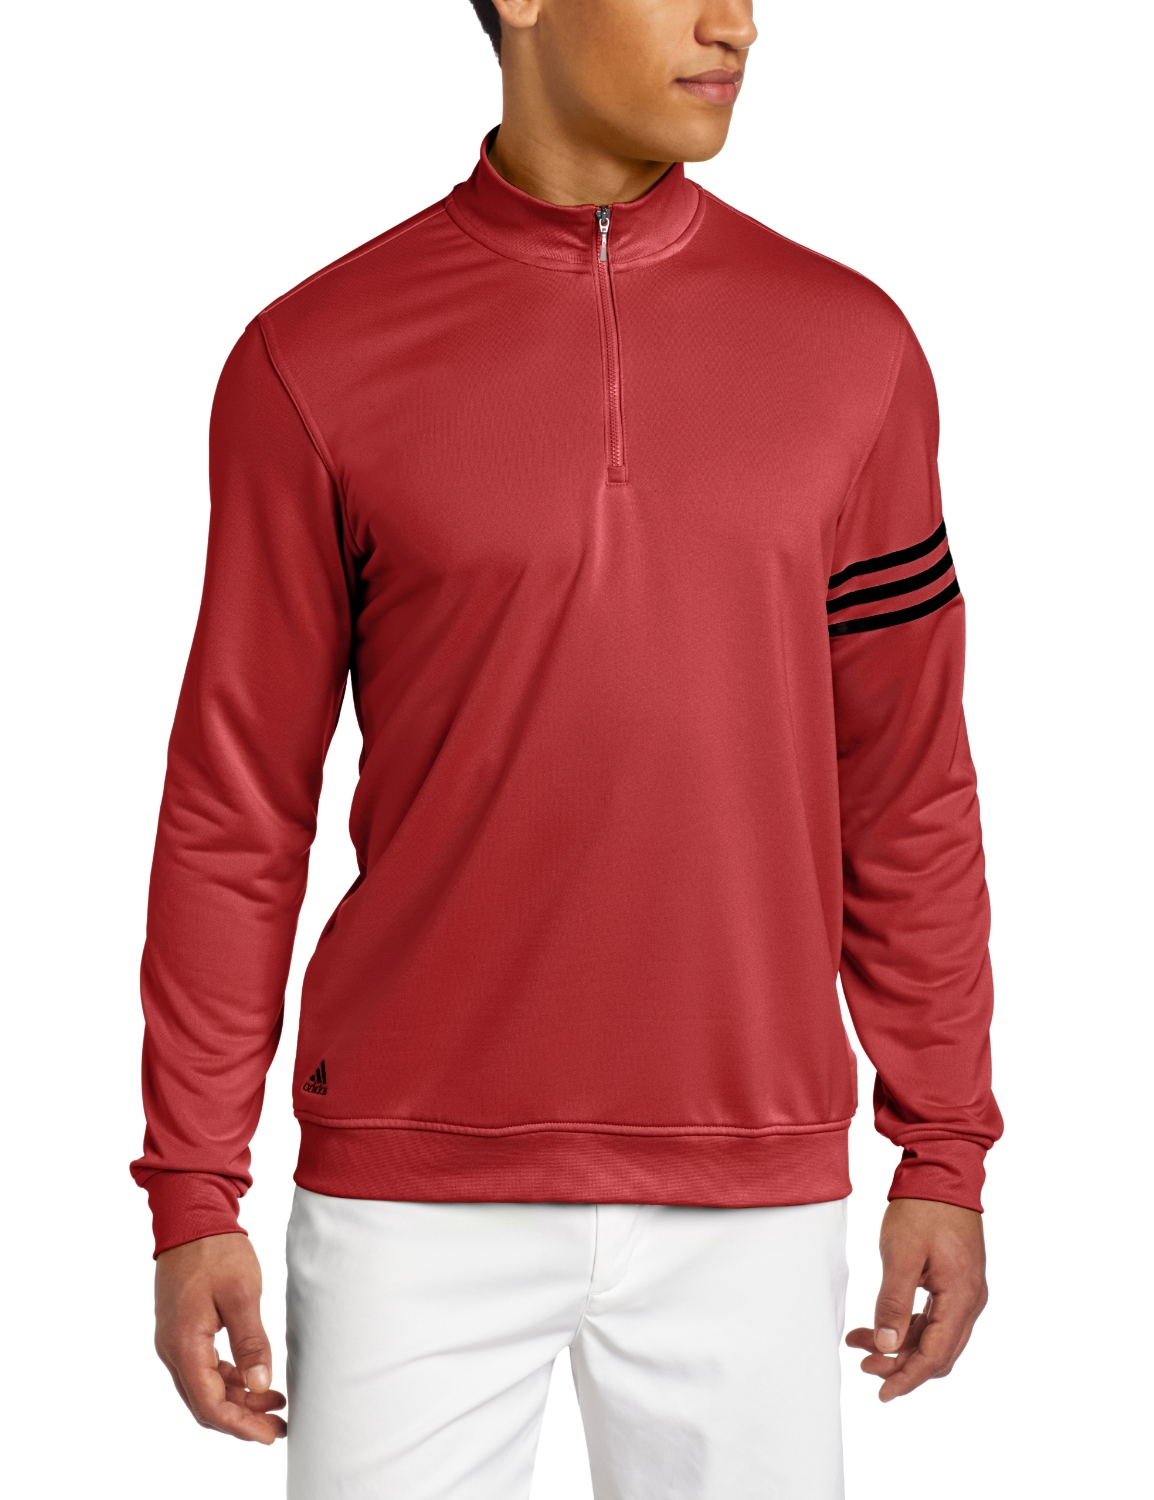 Mens Climalite 3-Stripes Golf Pullovers